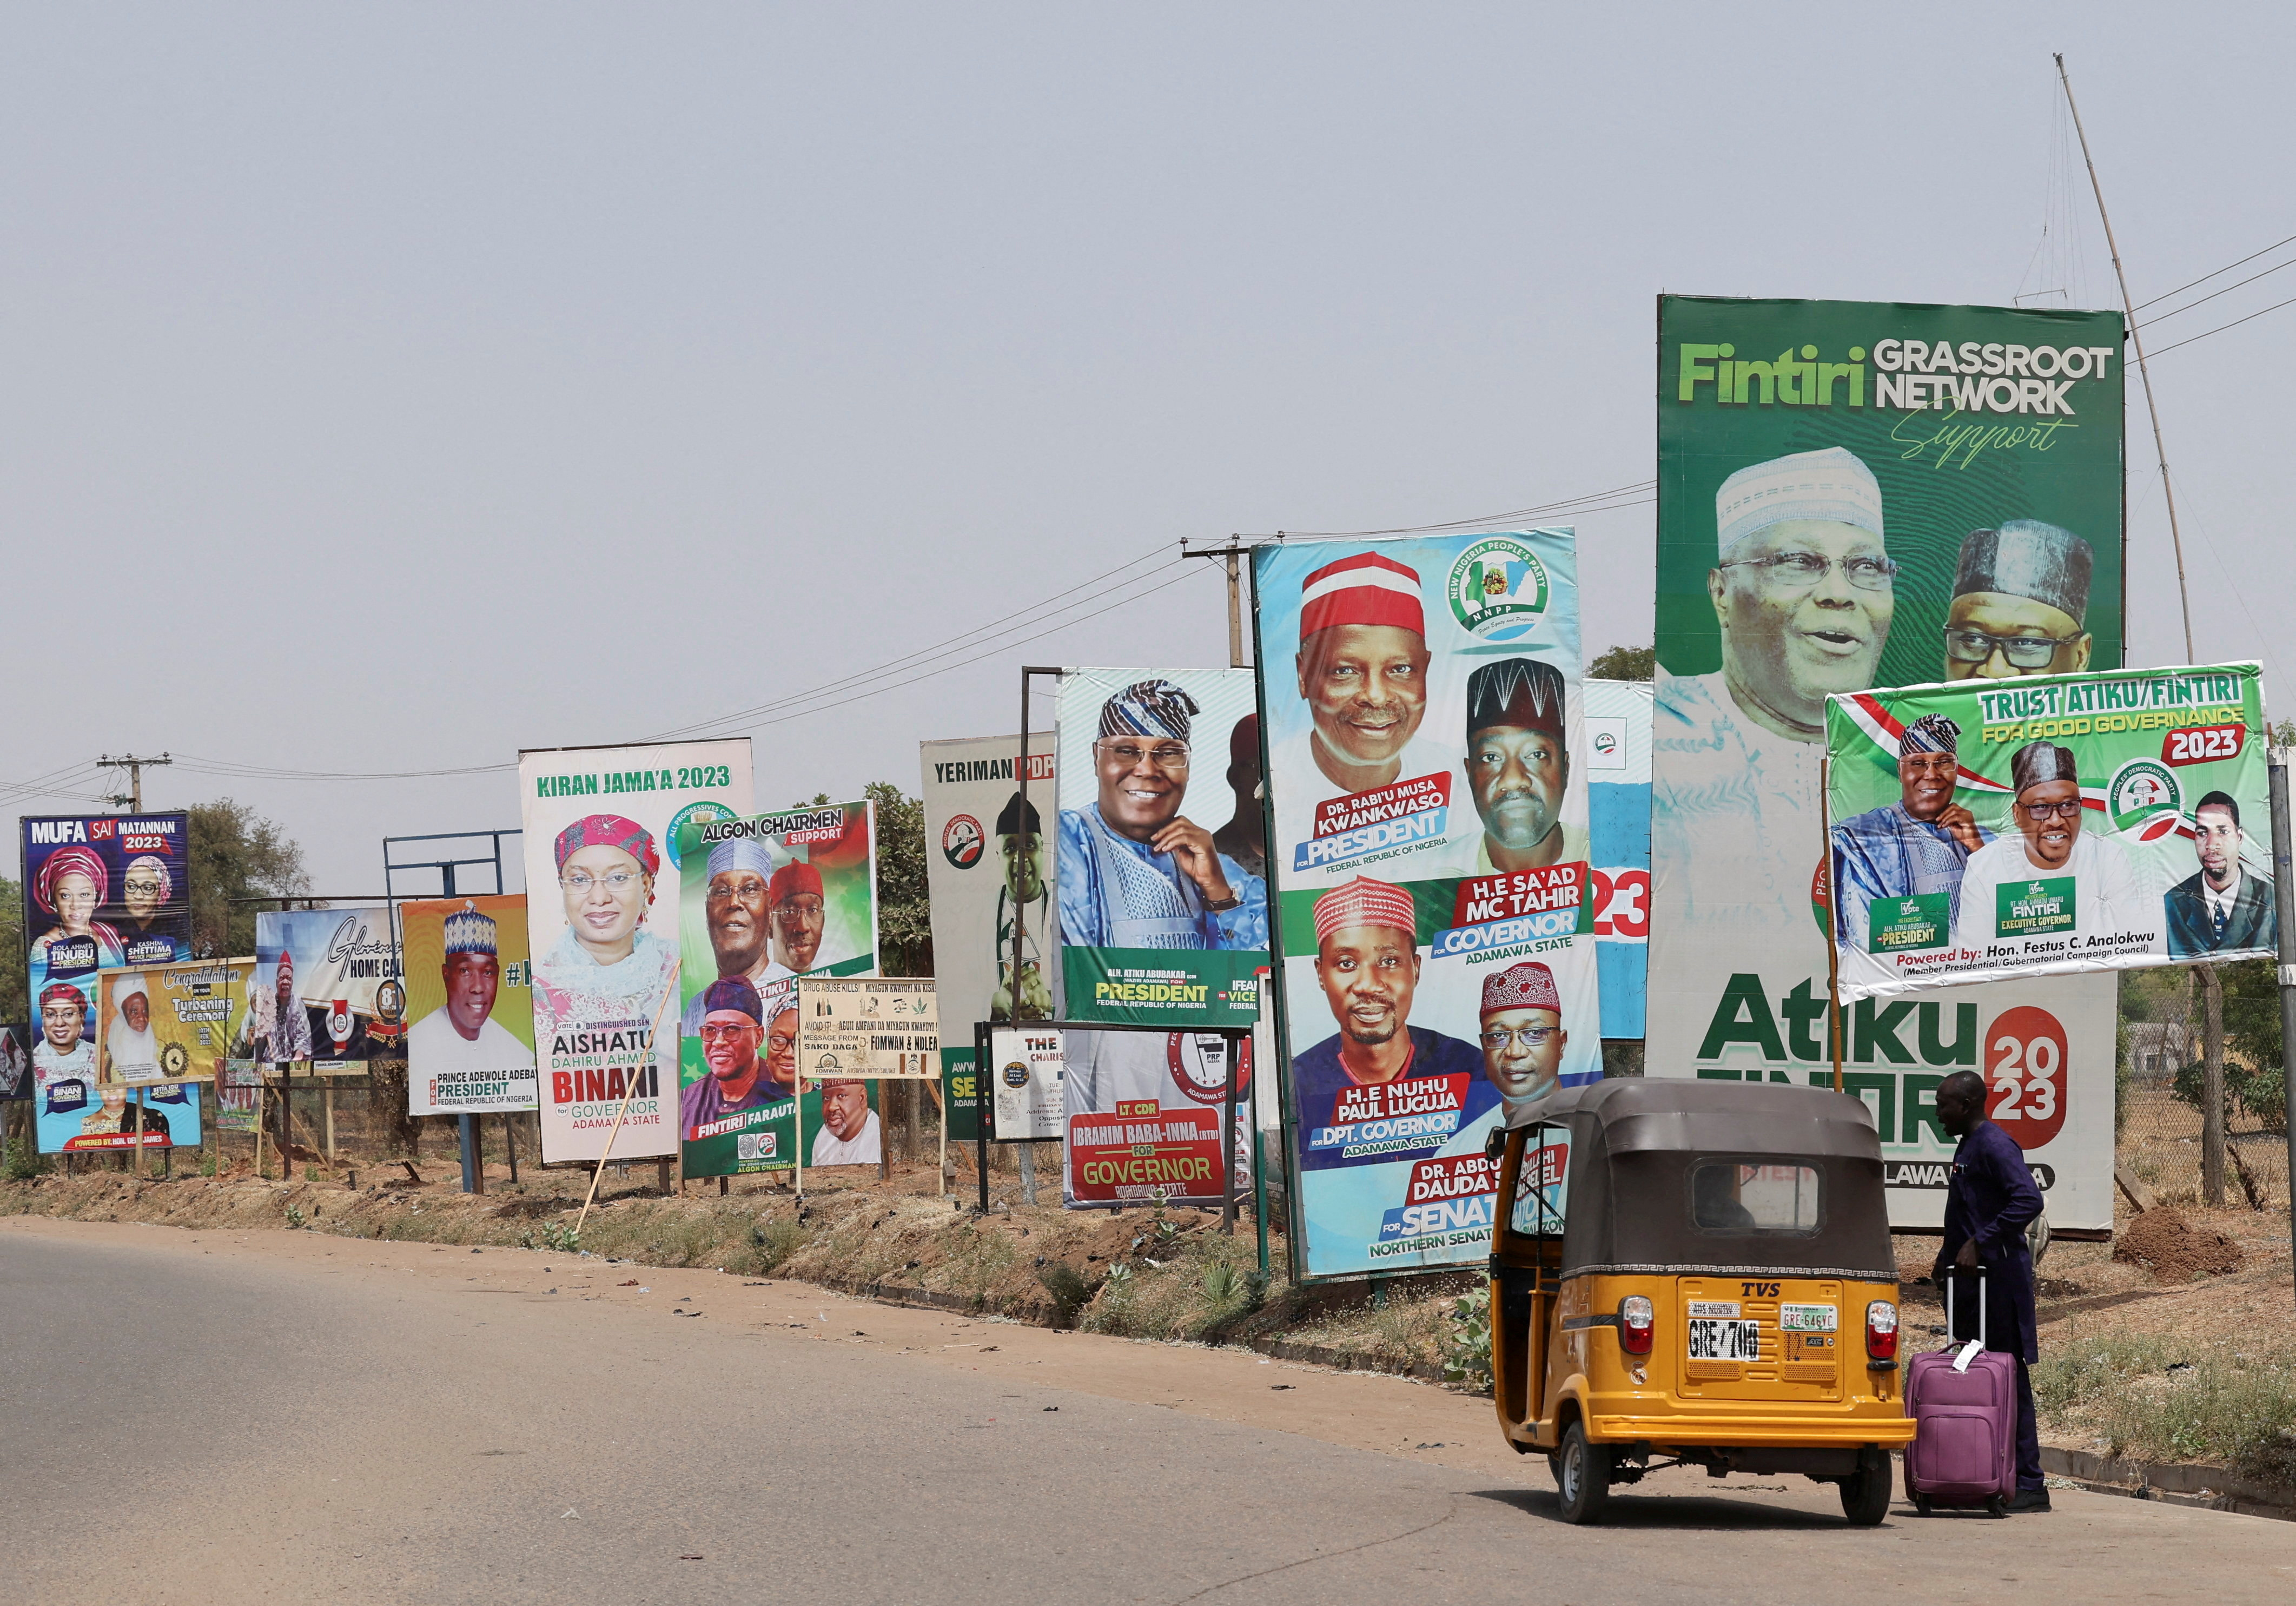 Nigeria gets ready for their upcoming elections 2023 in Yola